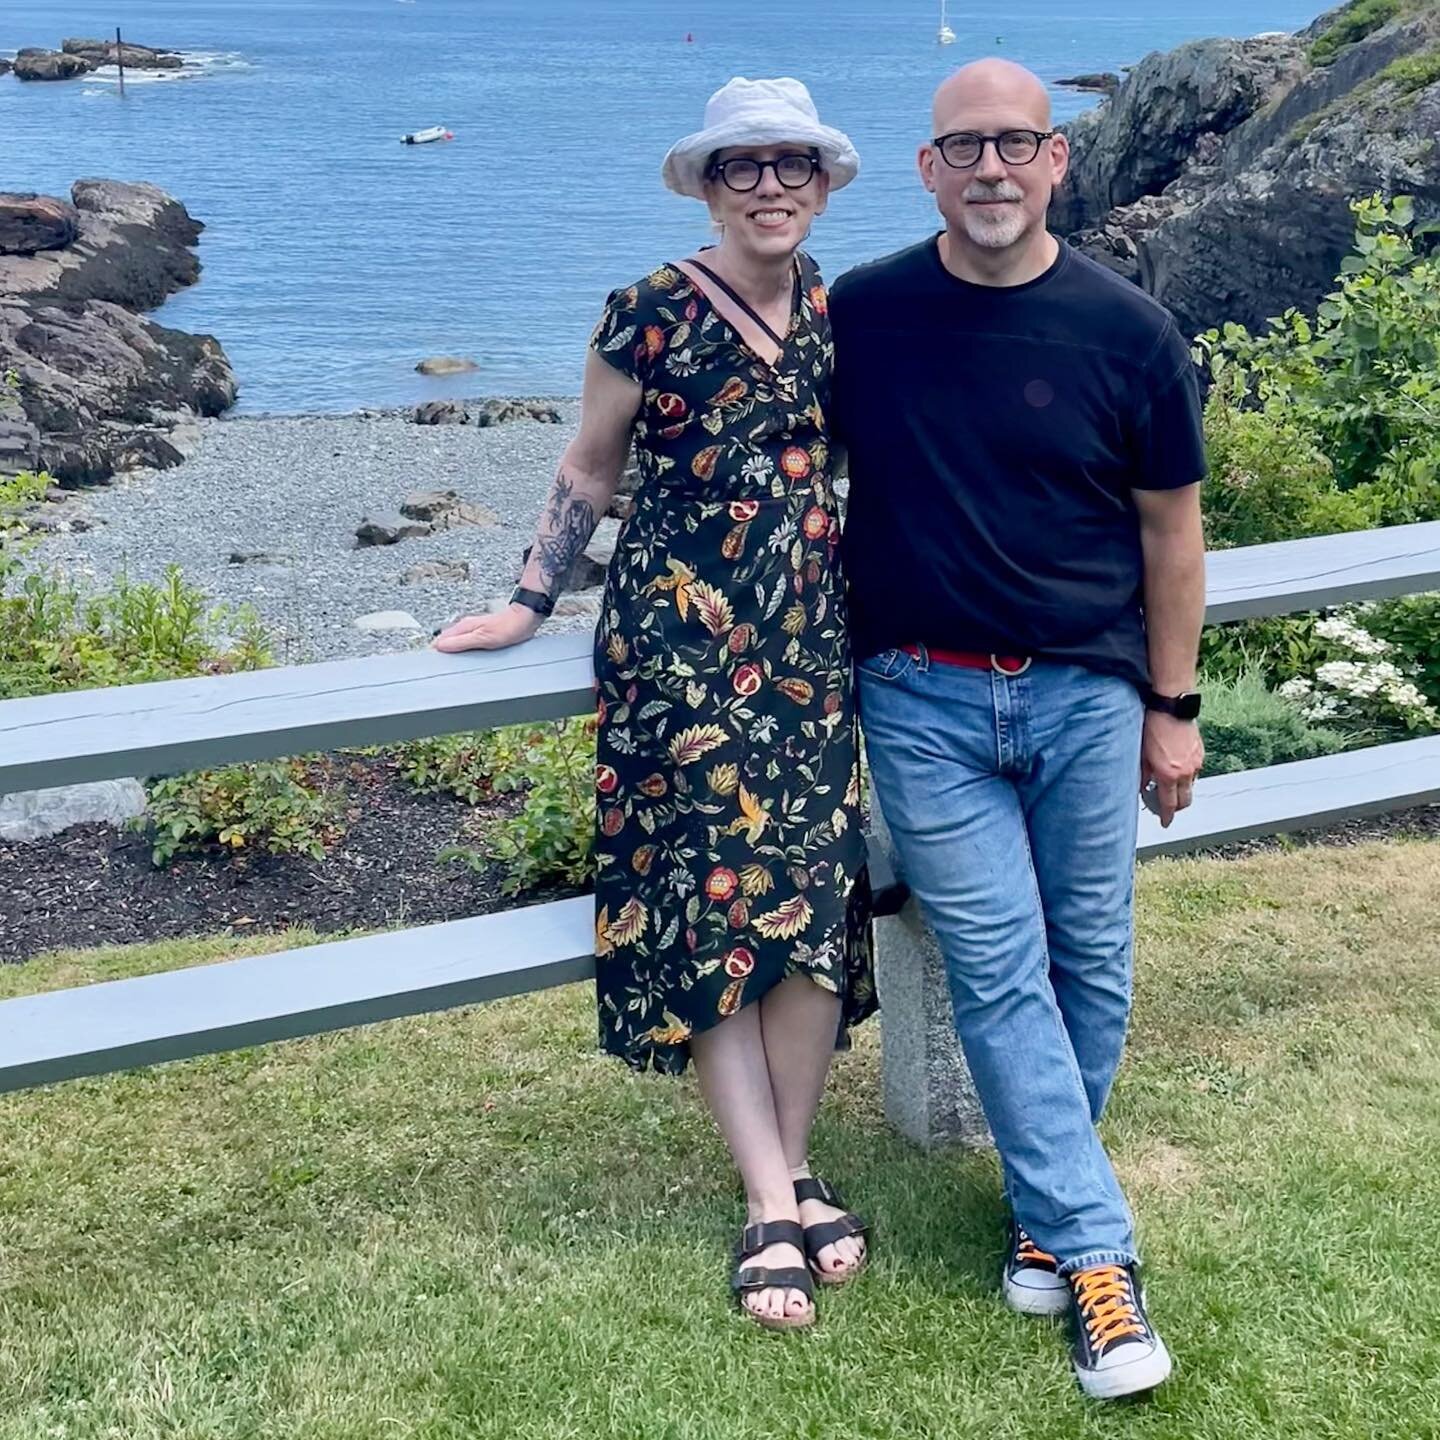 Sometimes we get out of the studio and explore places like @ogunquitmuseum. The art, grounds, and views are spectacular and provide all kinds of inspiration! #artmuseum #ogunquit #designinspo #branddevelopment #graphicdesign #burlingtonvermont #vermo